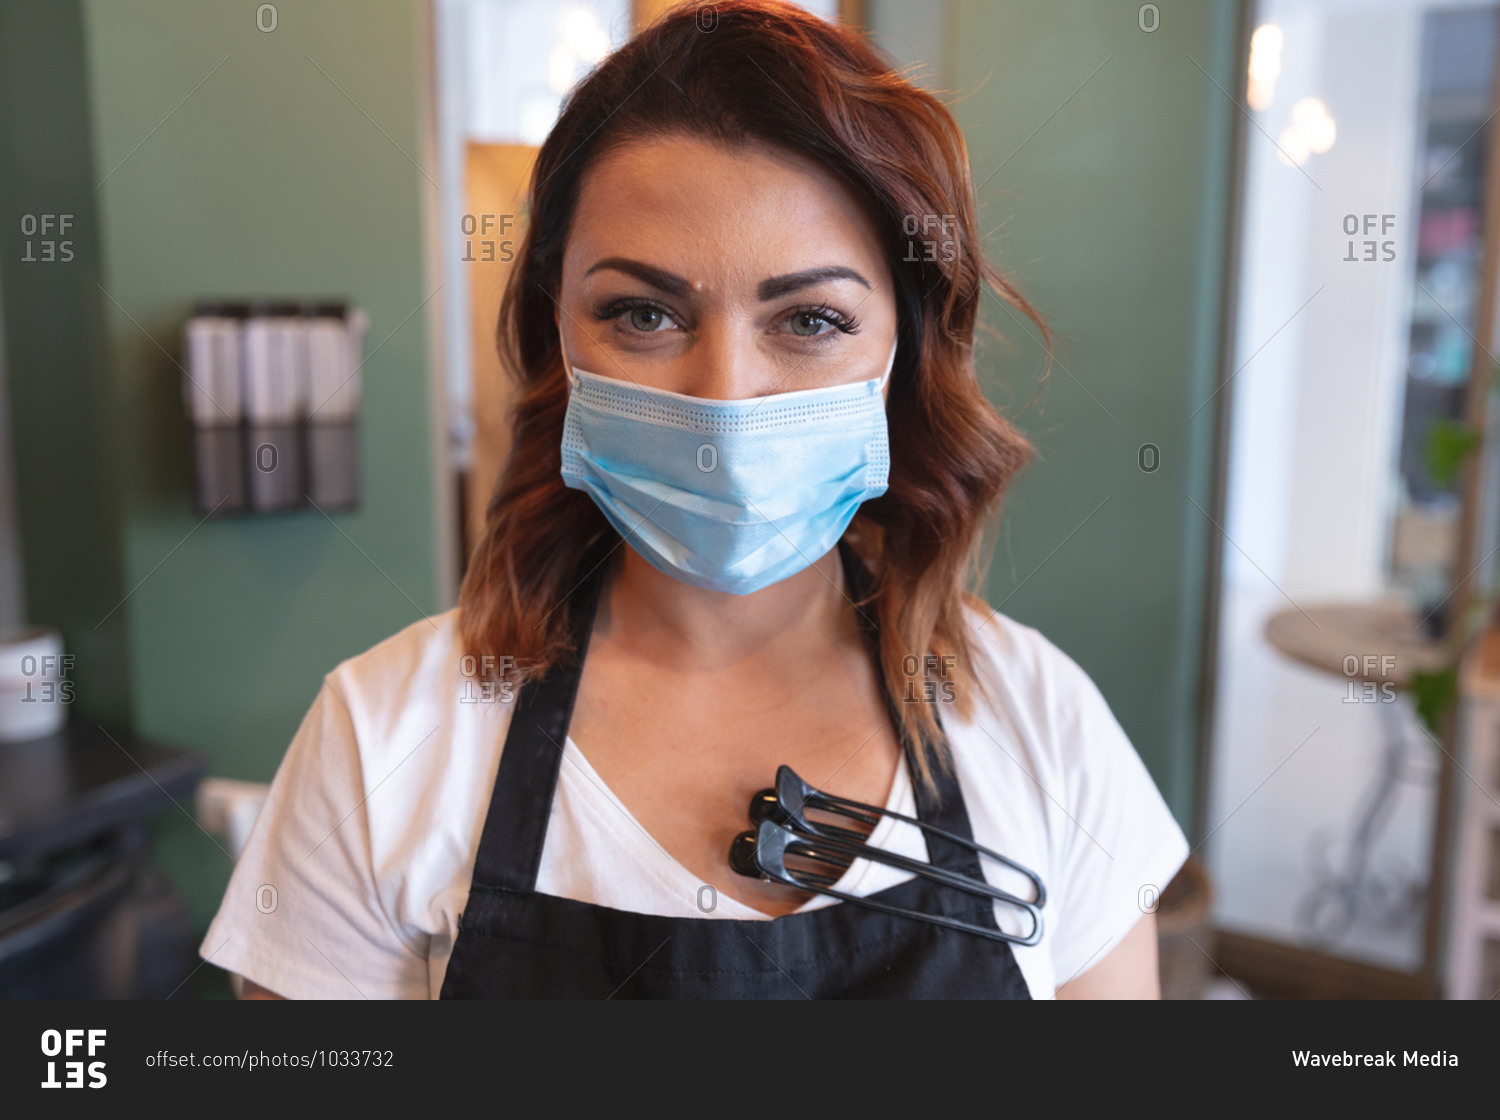 Portrait of Caucasian female hairdresser working in hair salon wearing face mask looking at camera. Health and hygiene in workplace during Coronavirus Covid 19 pandemic.